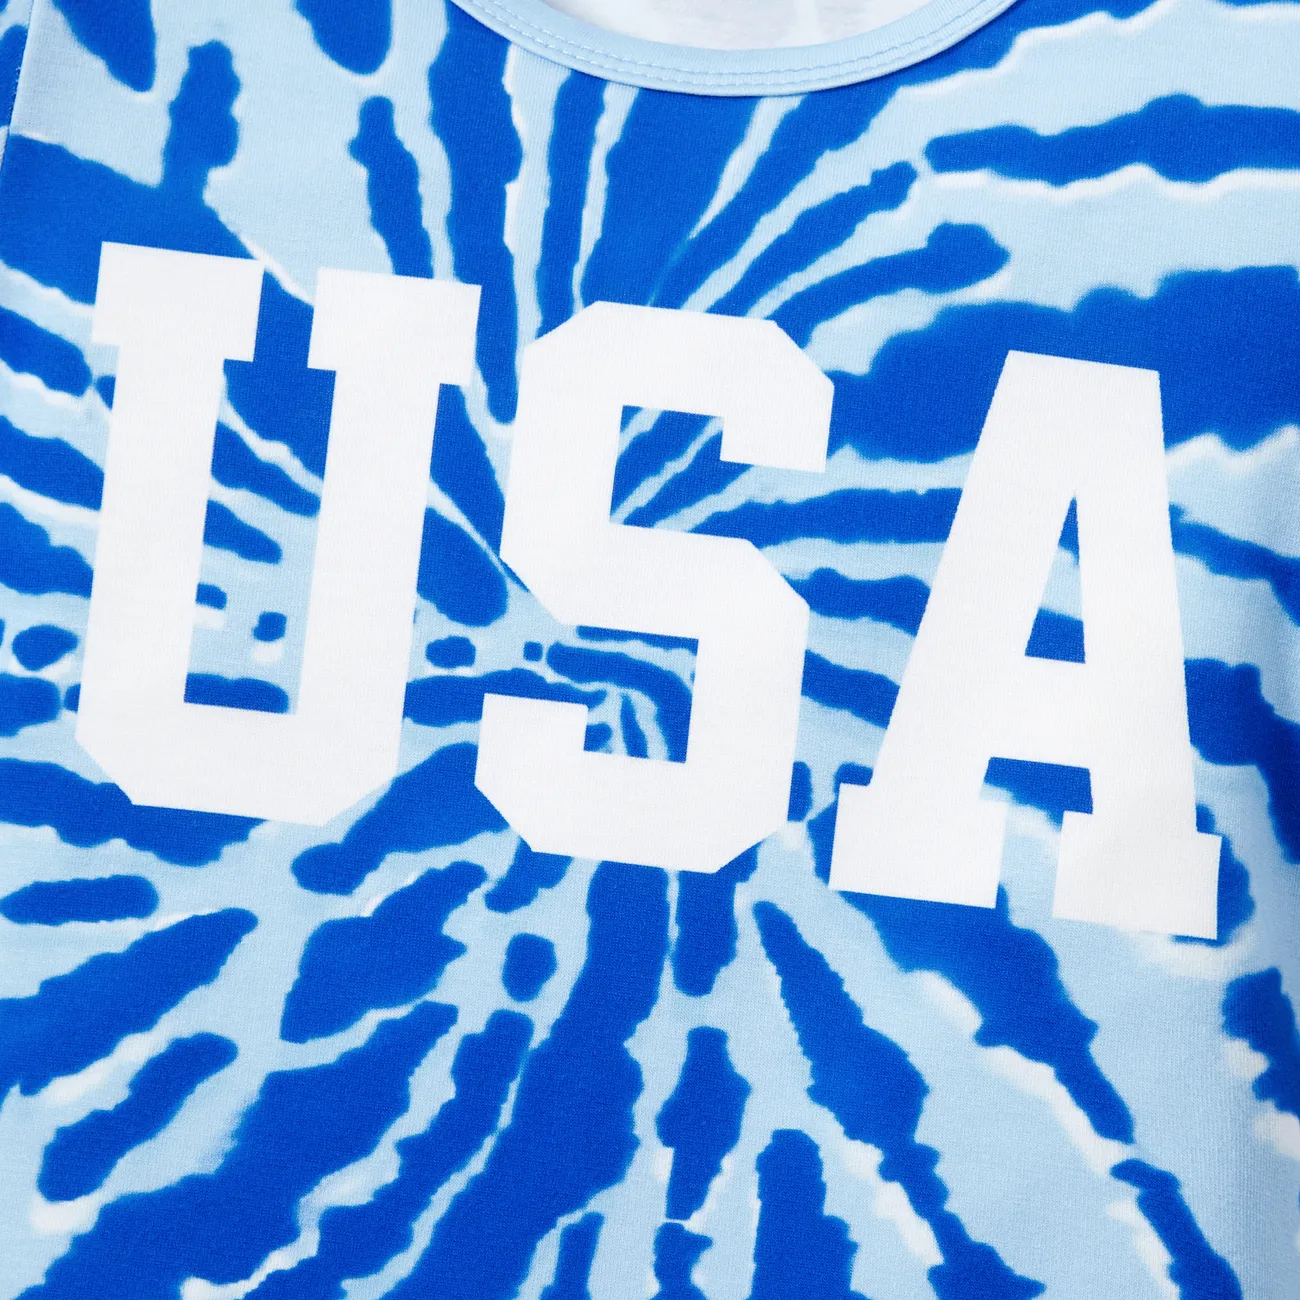 Independence Day Family Matching Tie-Dye Print USA Short Sleeves Letter Top Colorful big image 1